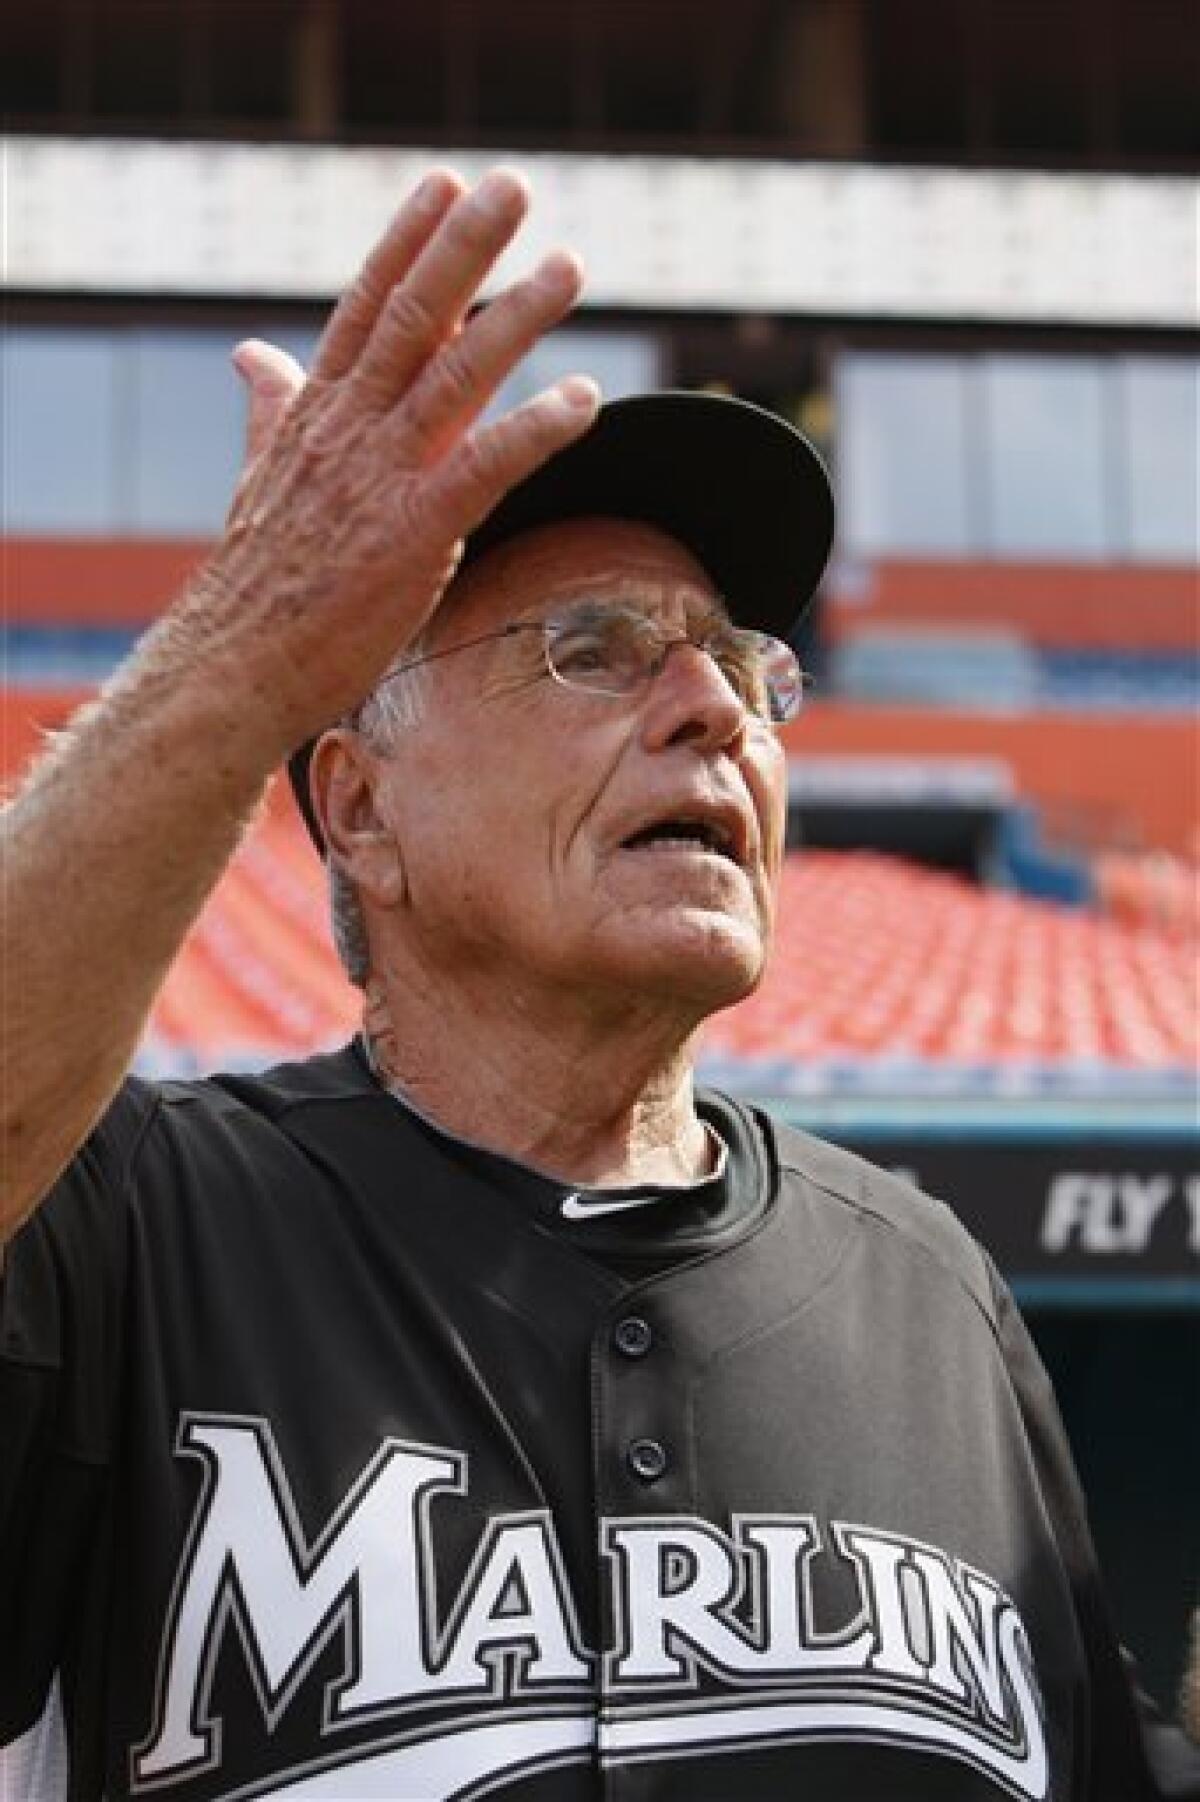 80-year-old McKeon is Marlins' interim manager - The San Diego Union-Tribune